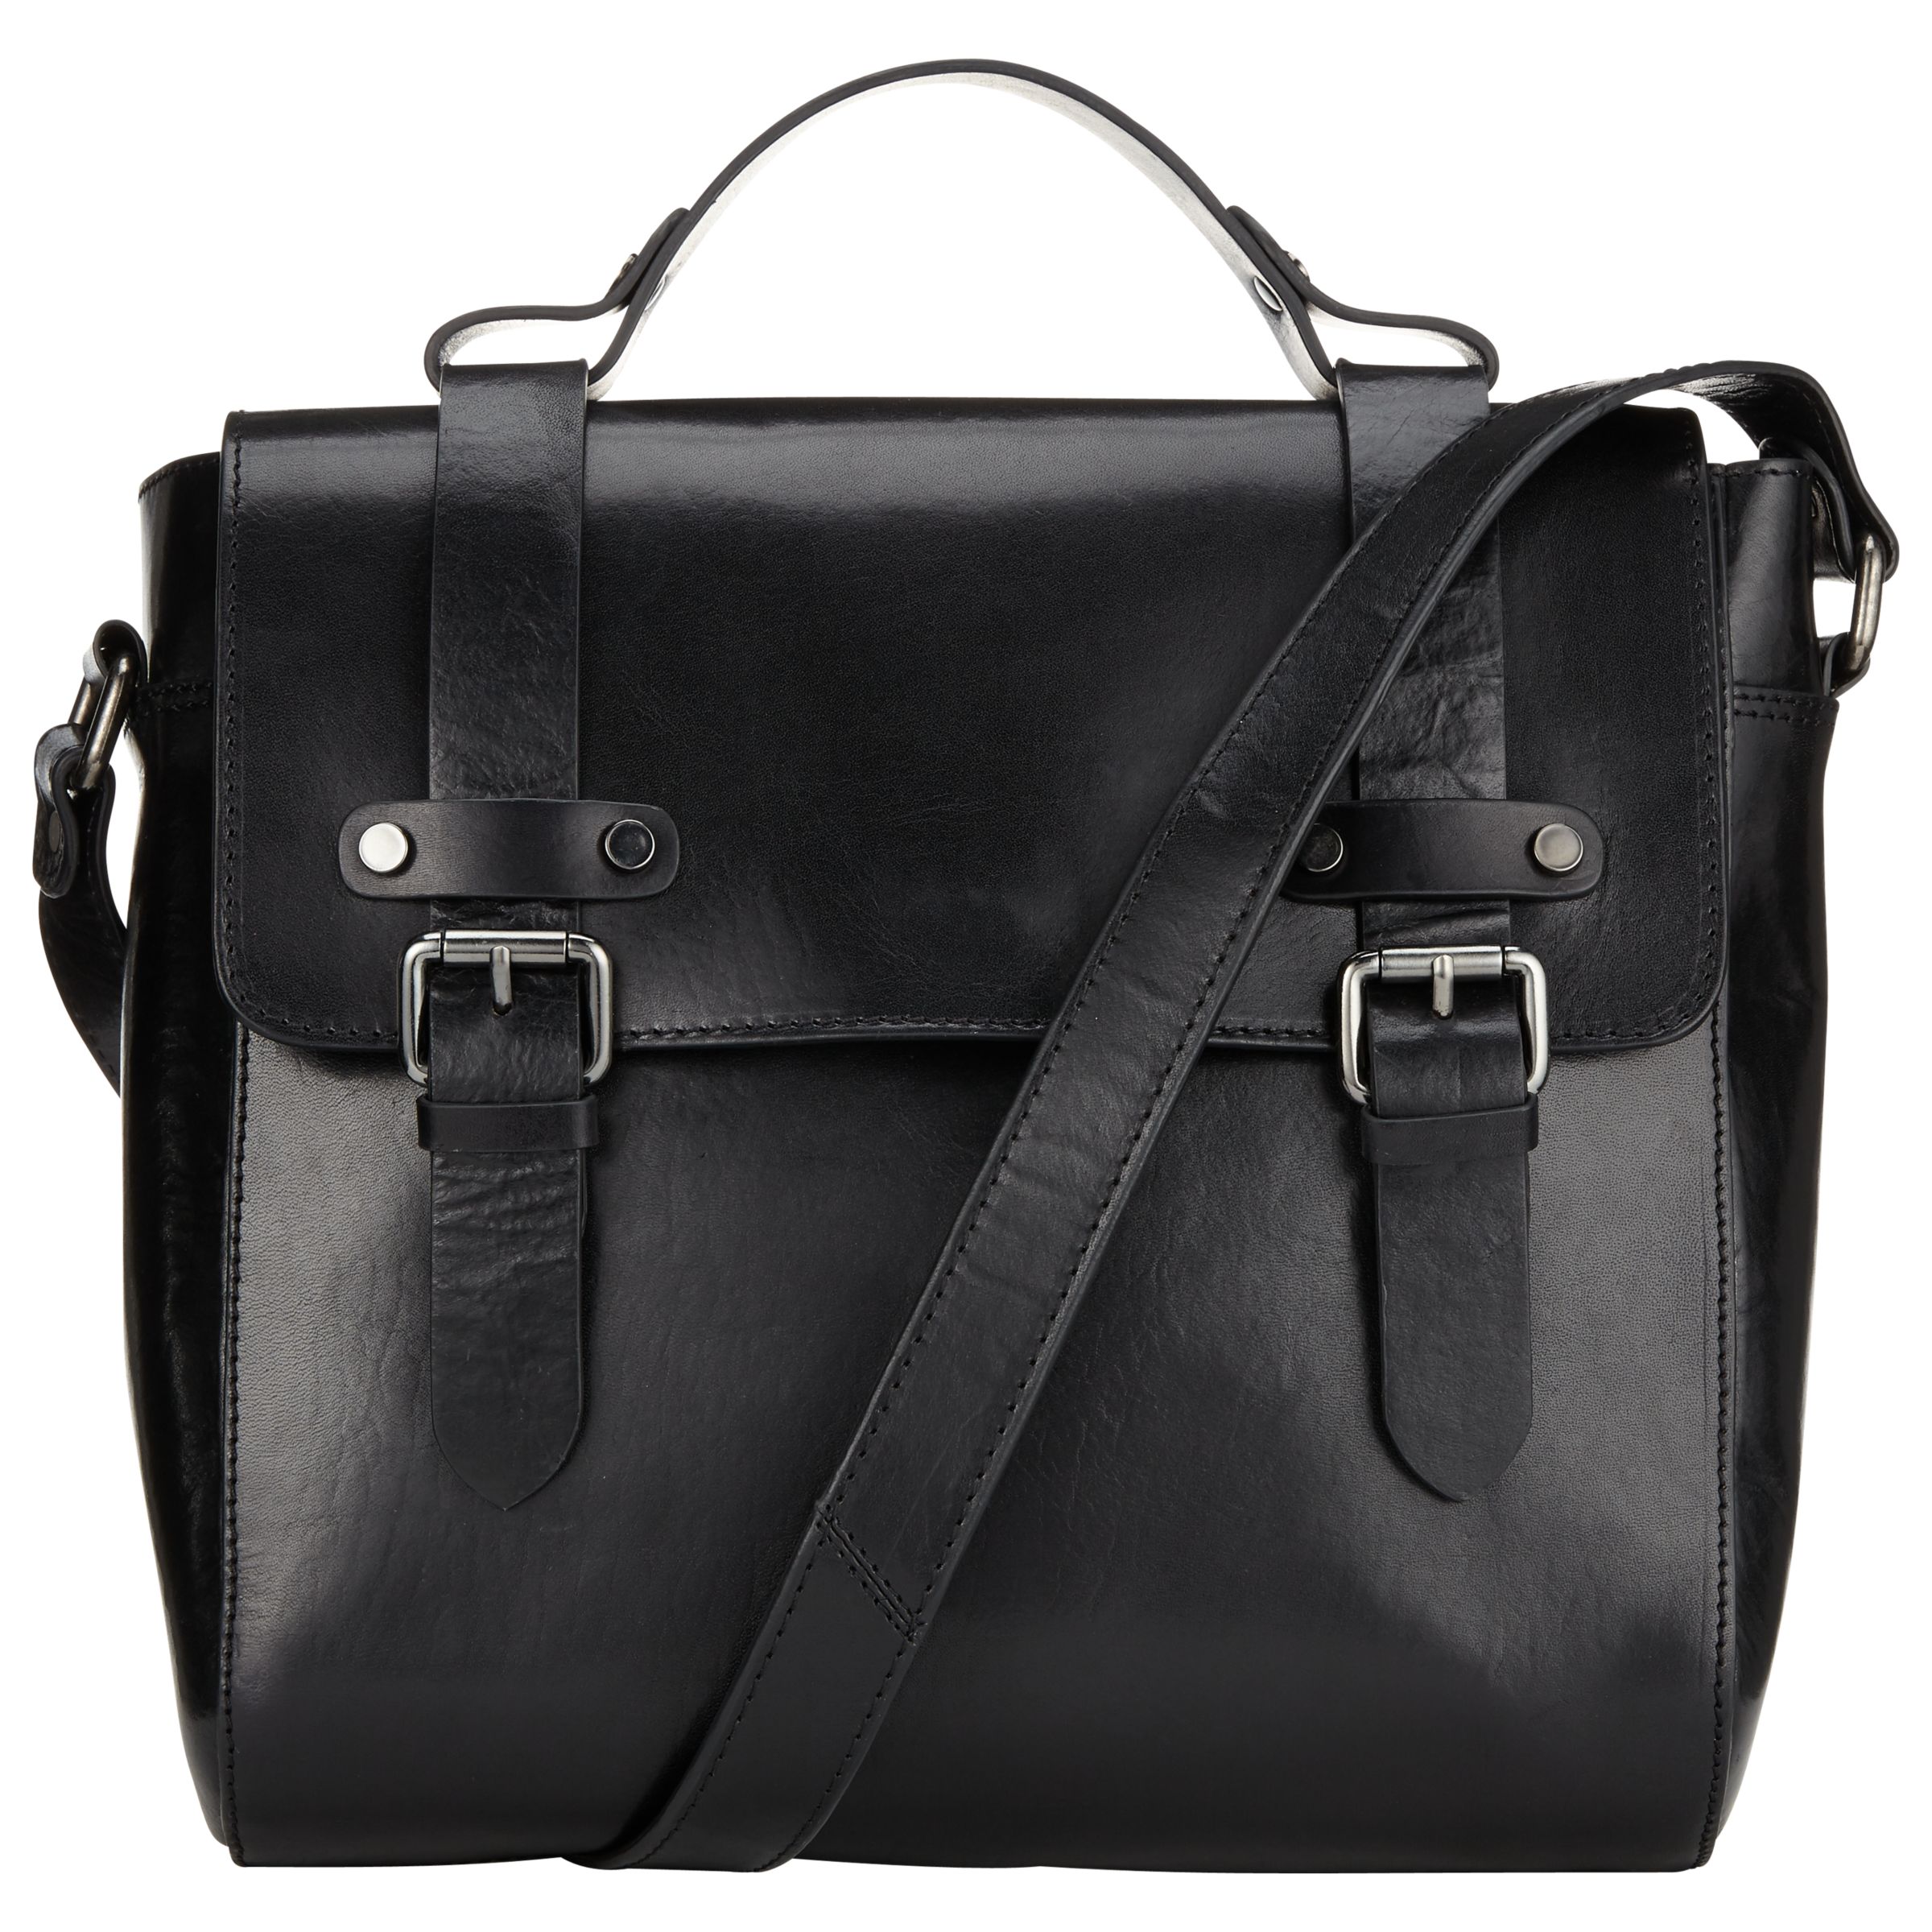 Collection WEEKEND by John Lewis Maeve Leather Across Body Messenger Bag, Black at John Lewis ...